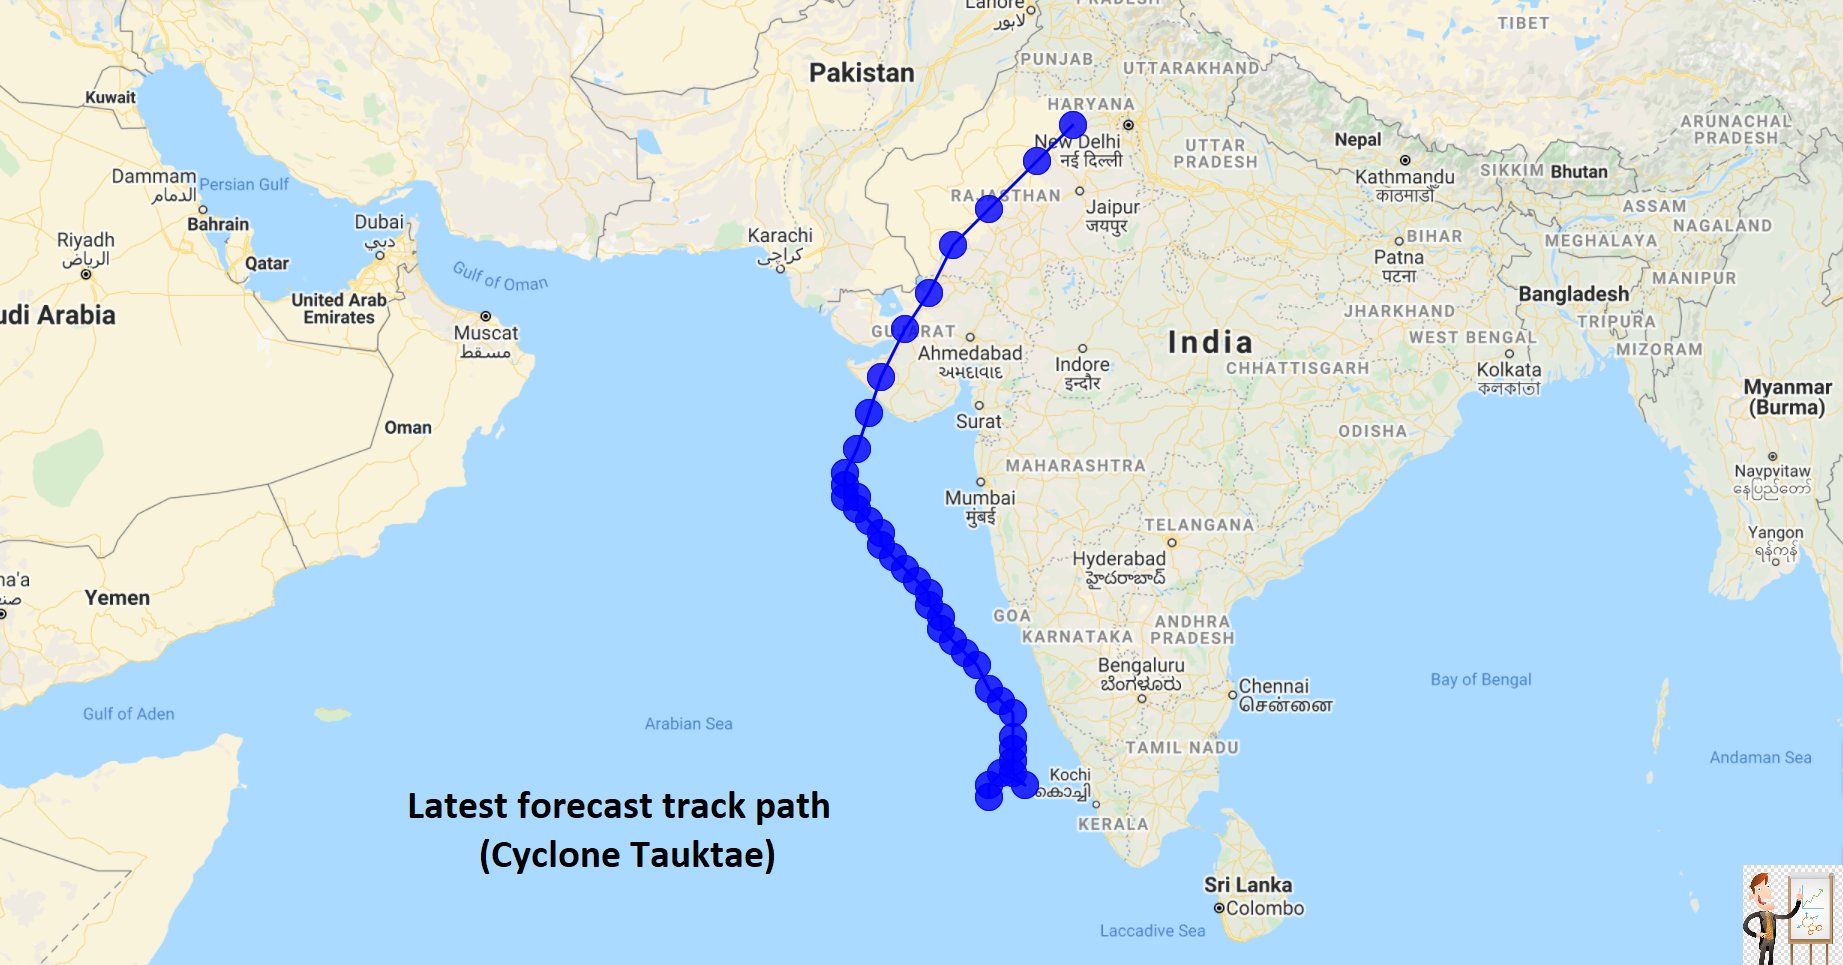 Low pressure area Arabian sea and to a cyclonic storm Tauktae and move towards India. Expect heavy rains and strong winds !